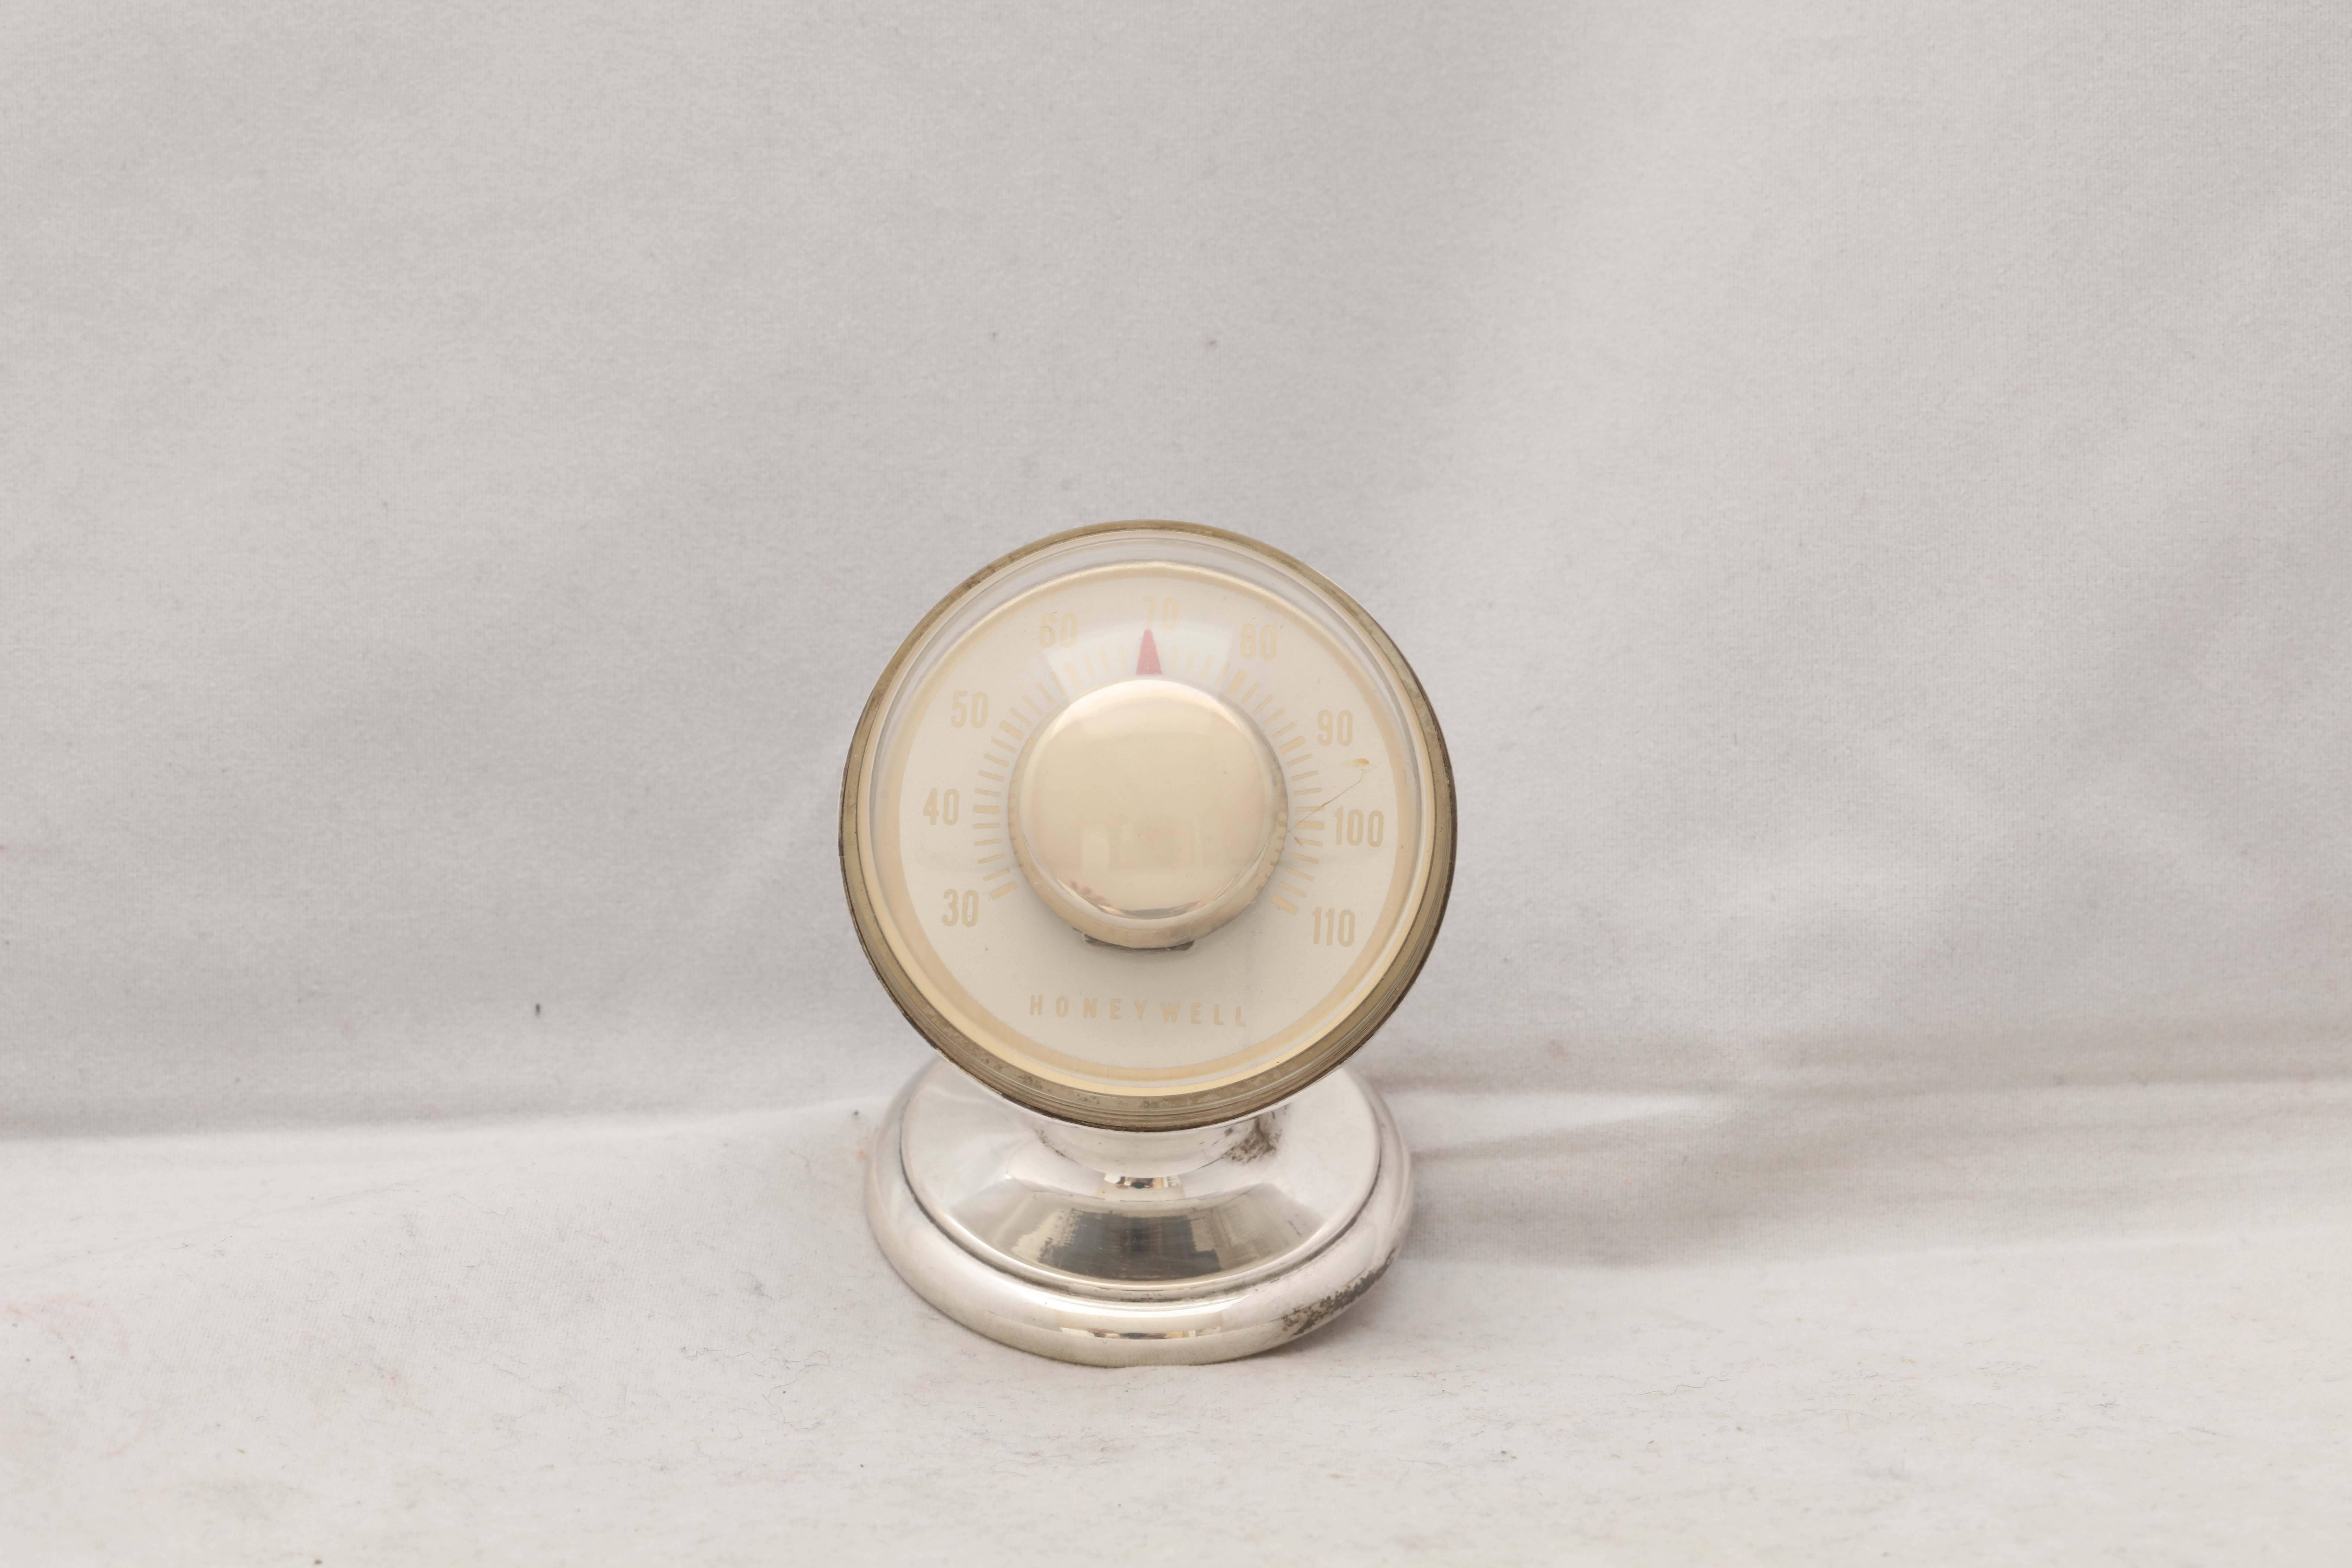 Mid-Century Modern, sterling silver desk thermometer, Tiffany & Co., New York, circa 1950s-1960s. @3